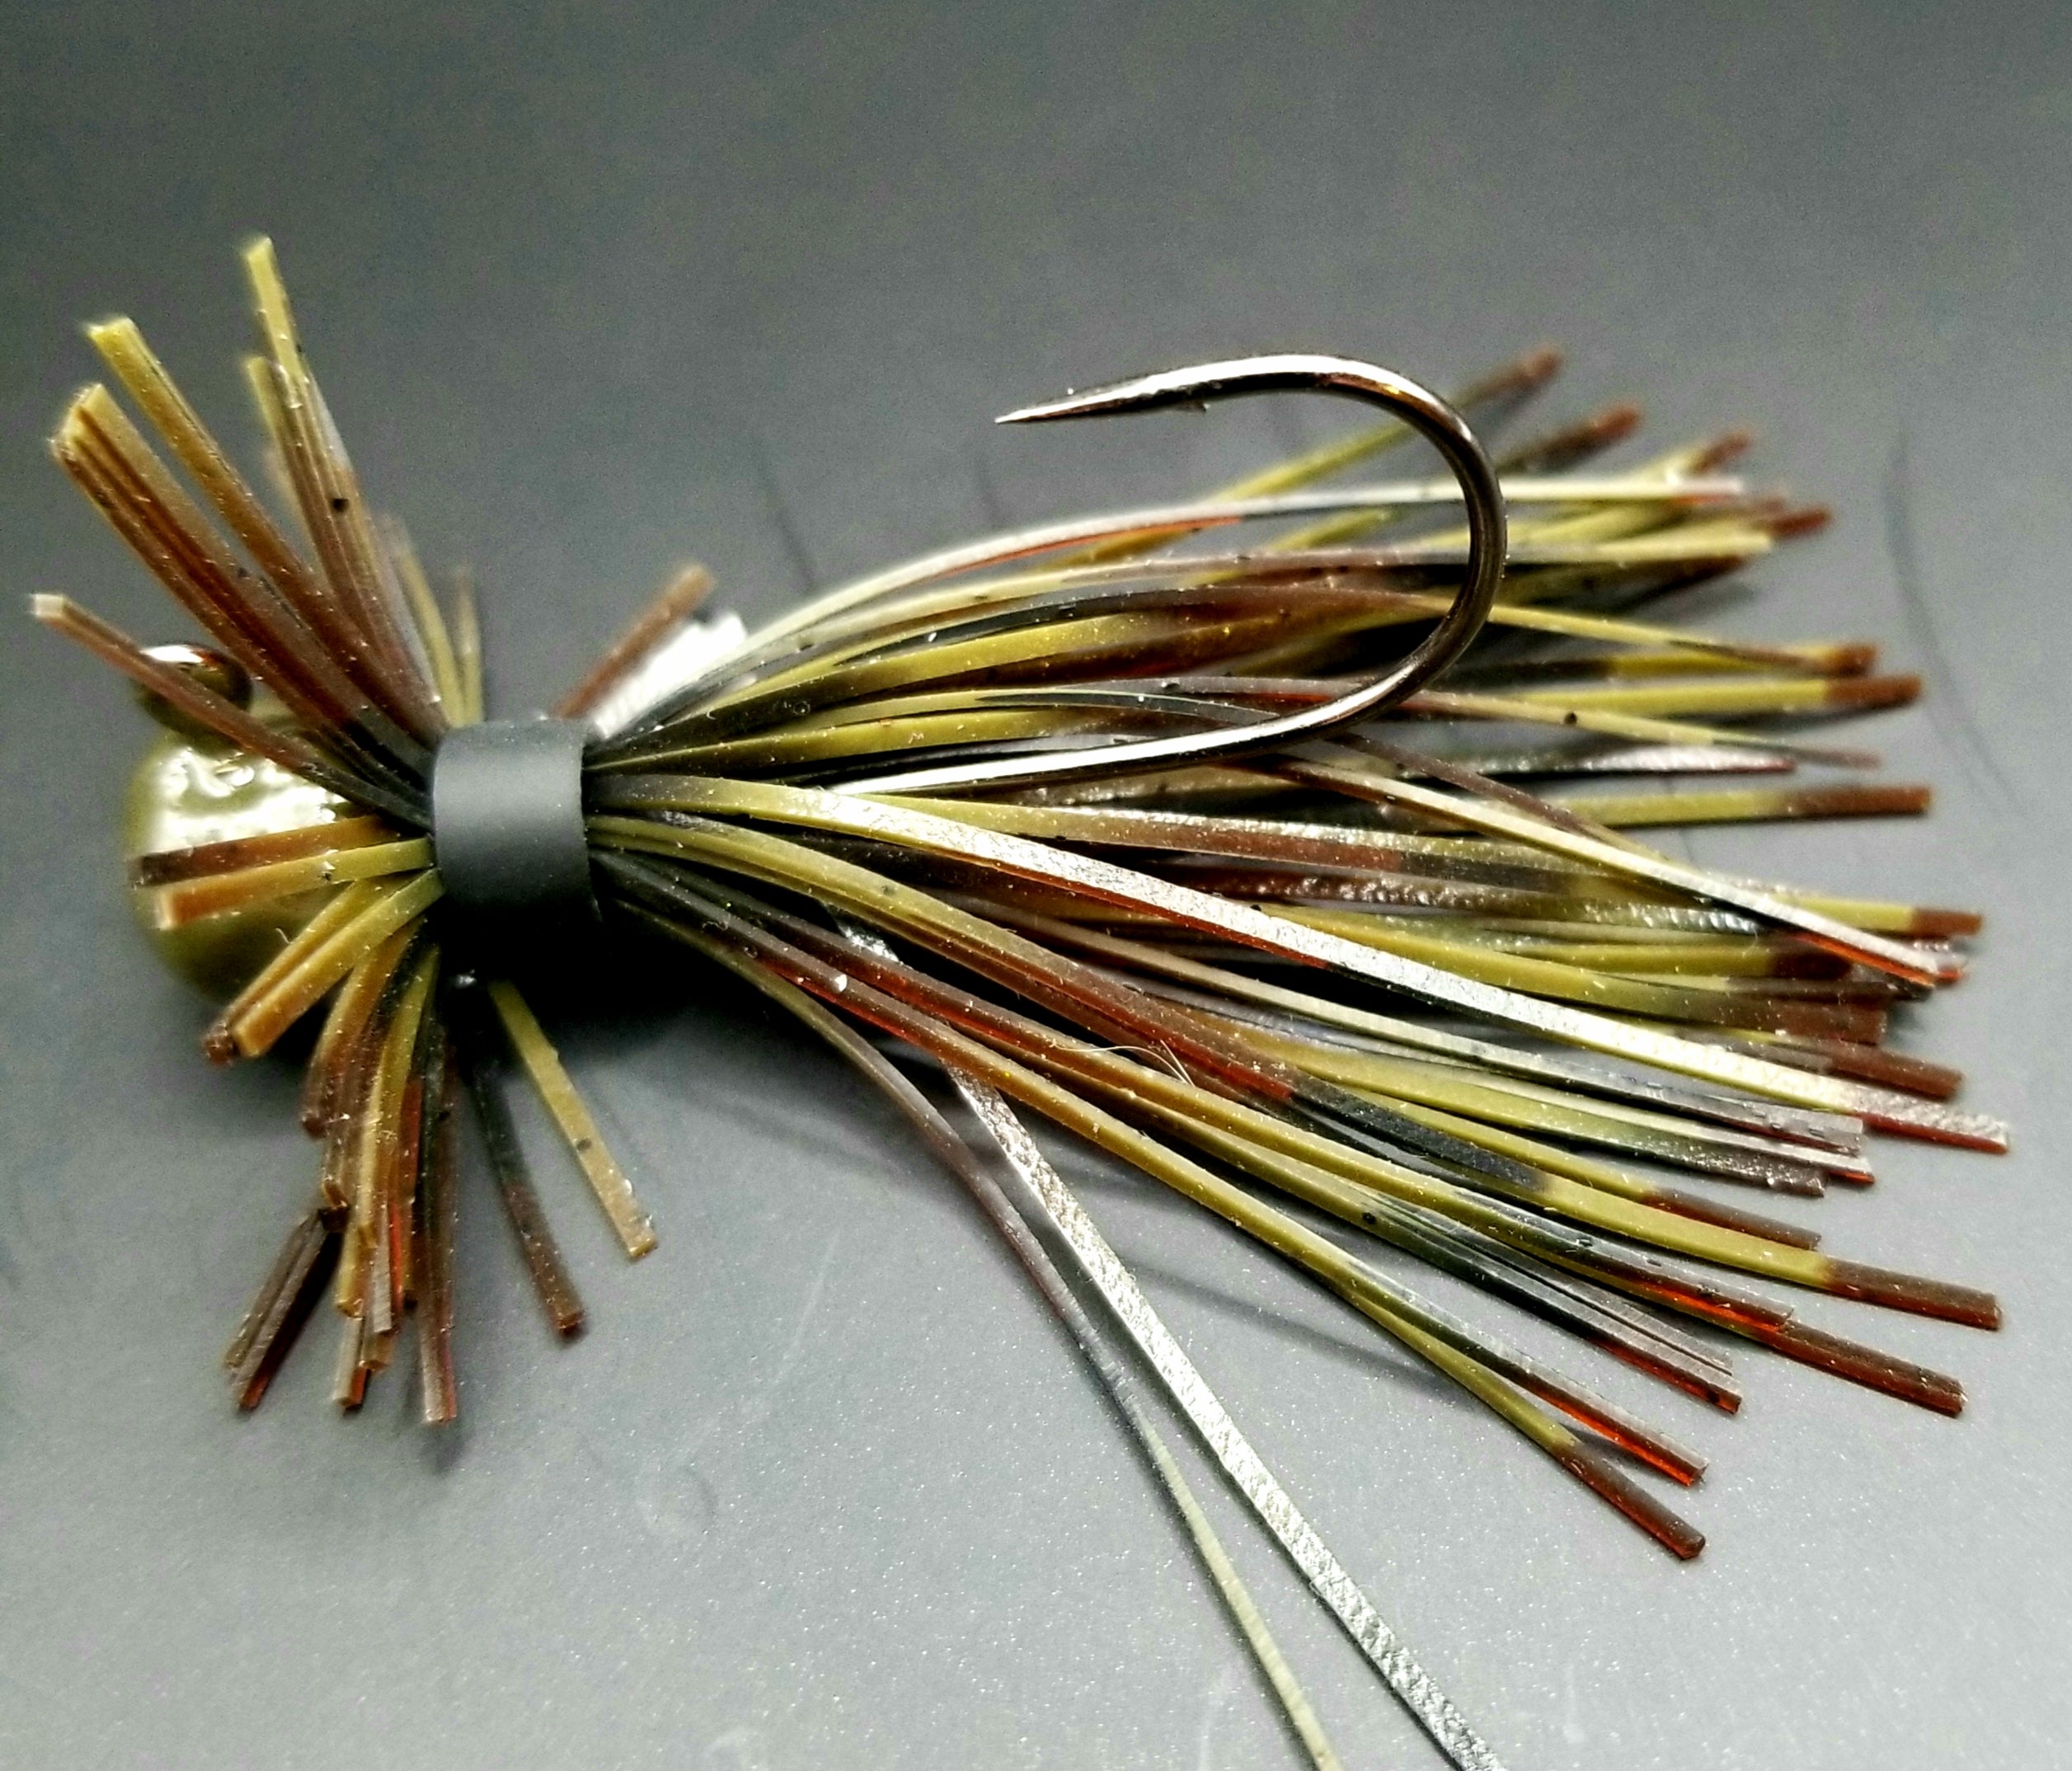 A smaller finesse jig is a spring fishing essential for me. The smaller jigs  match the size of the newly hatched bait fish and crawfish a